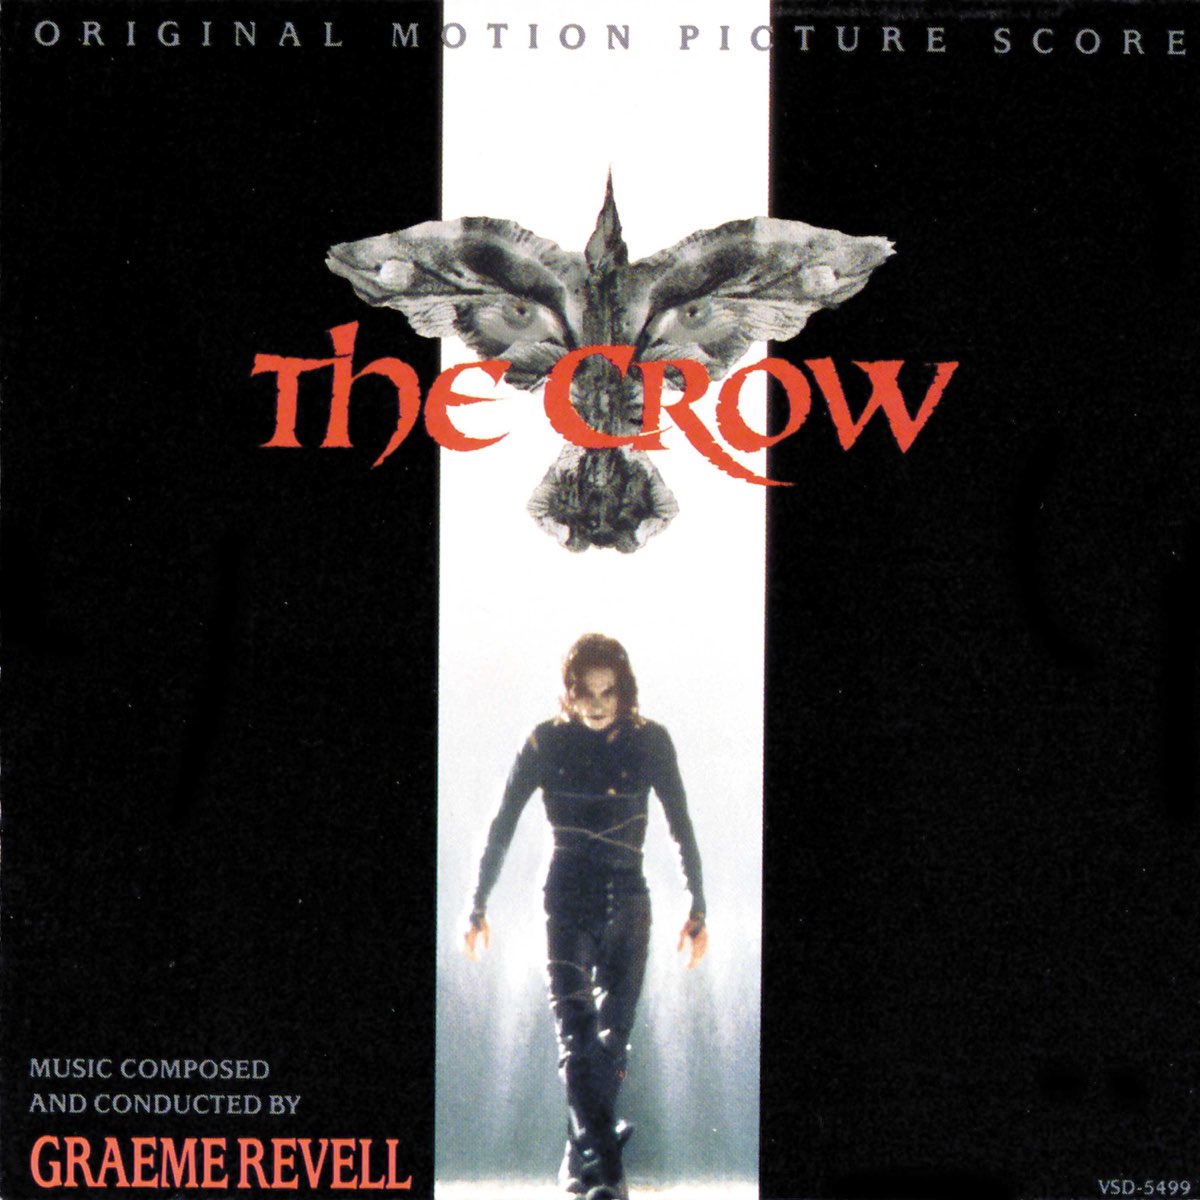 ‎The Crow (Original Motion Picture Score) by Graeme Revell on Apple Music